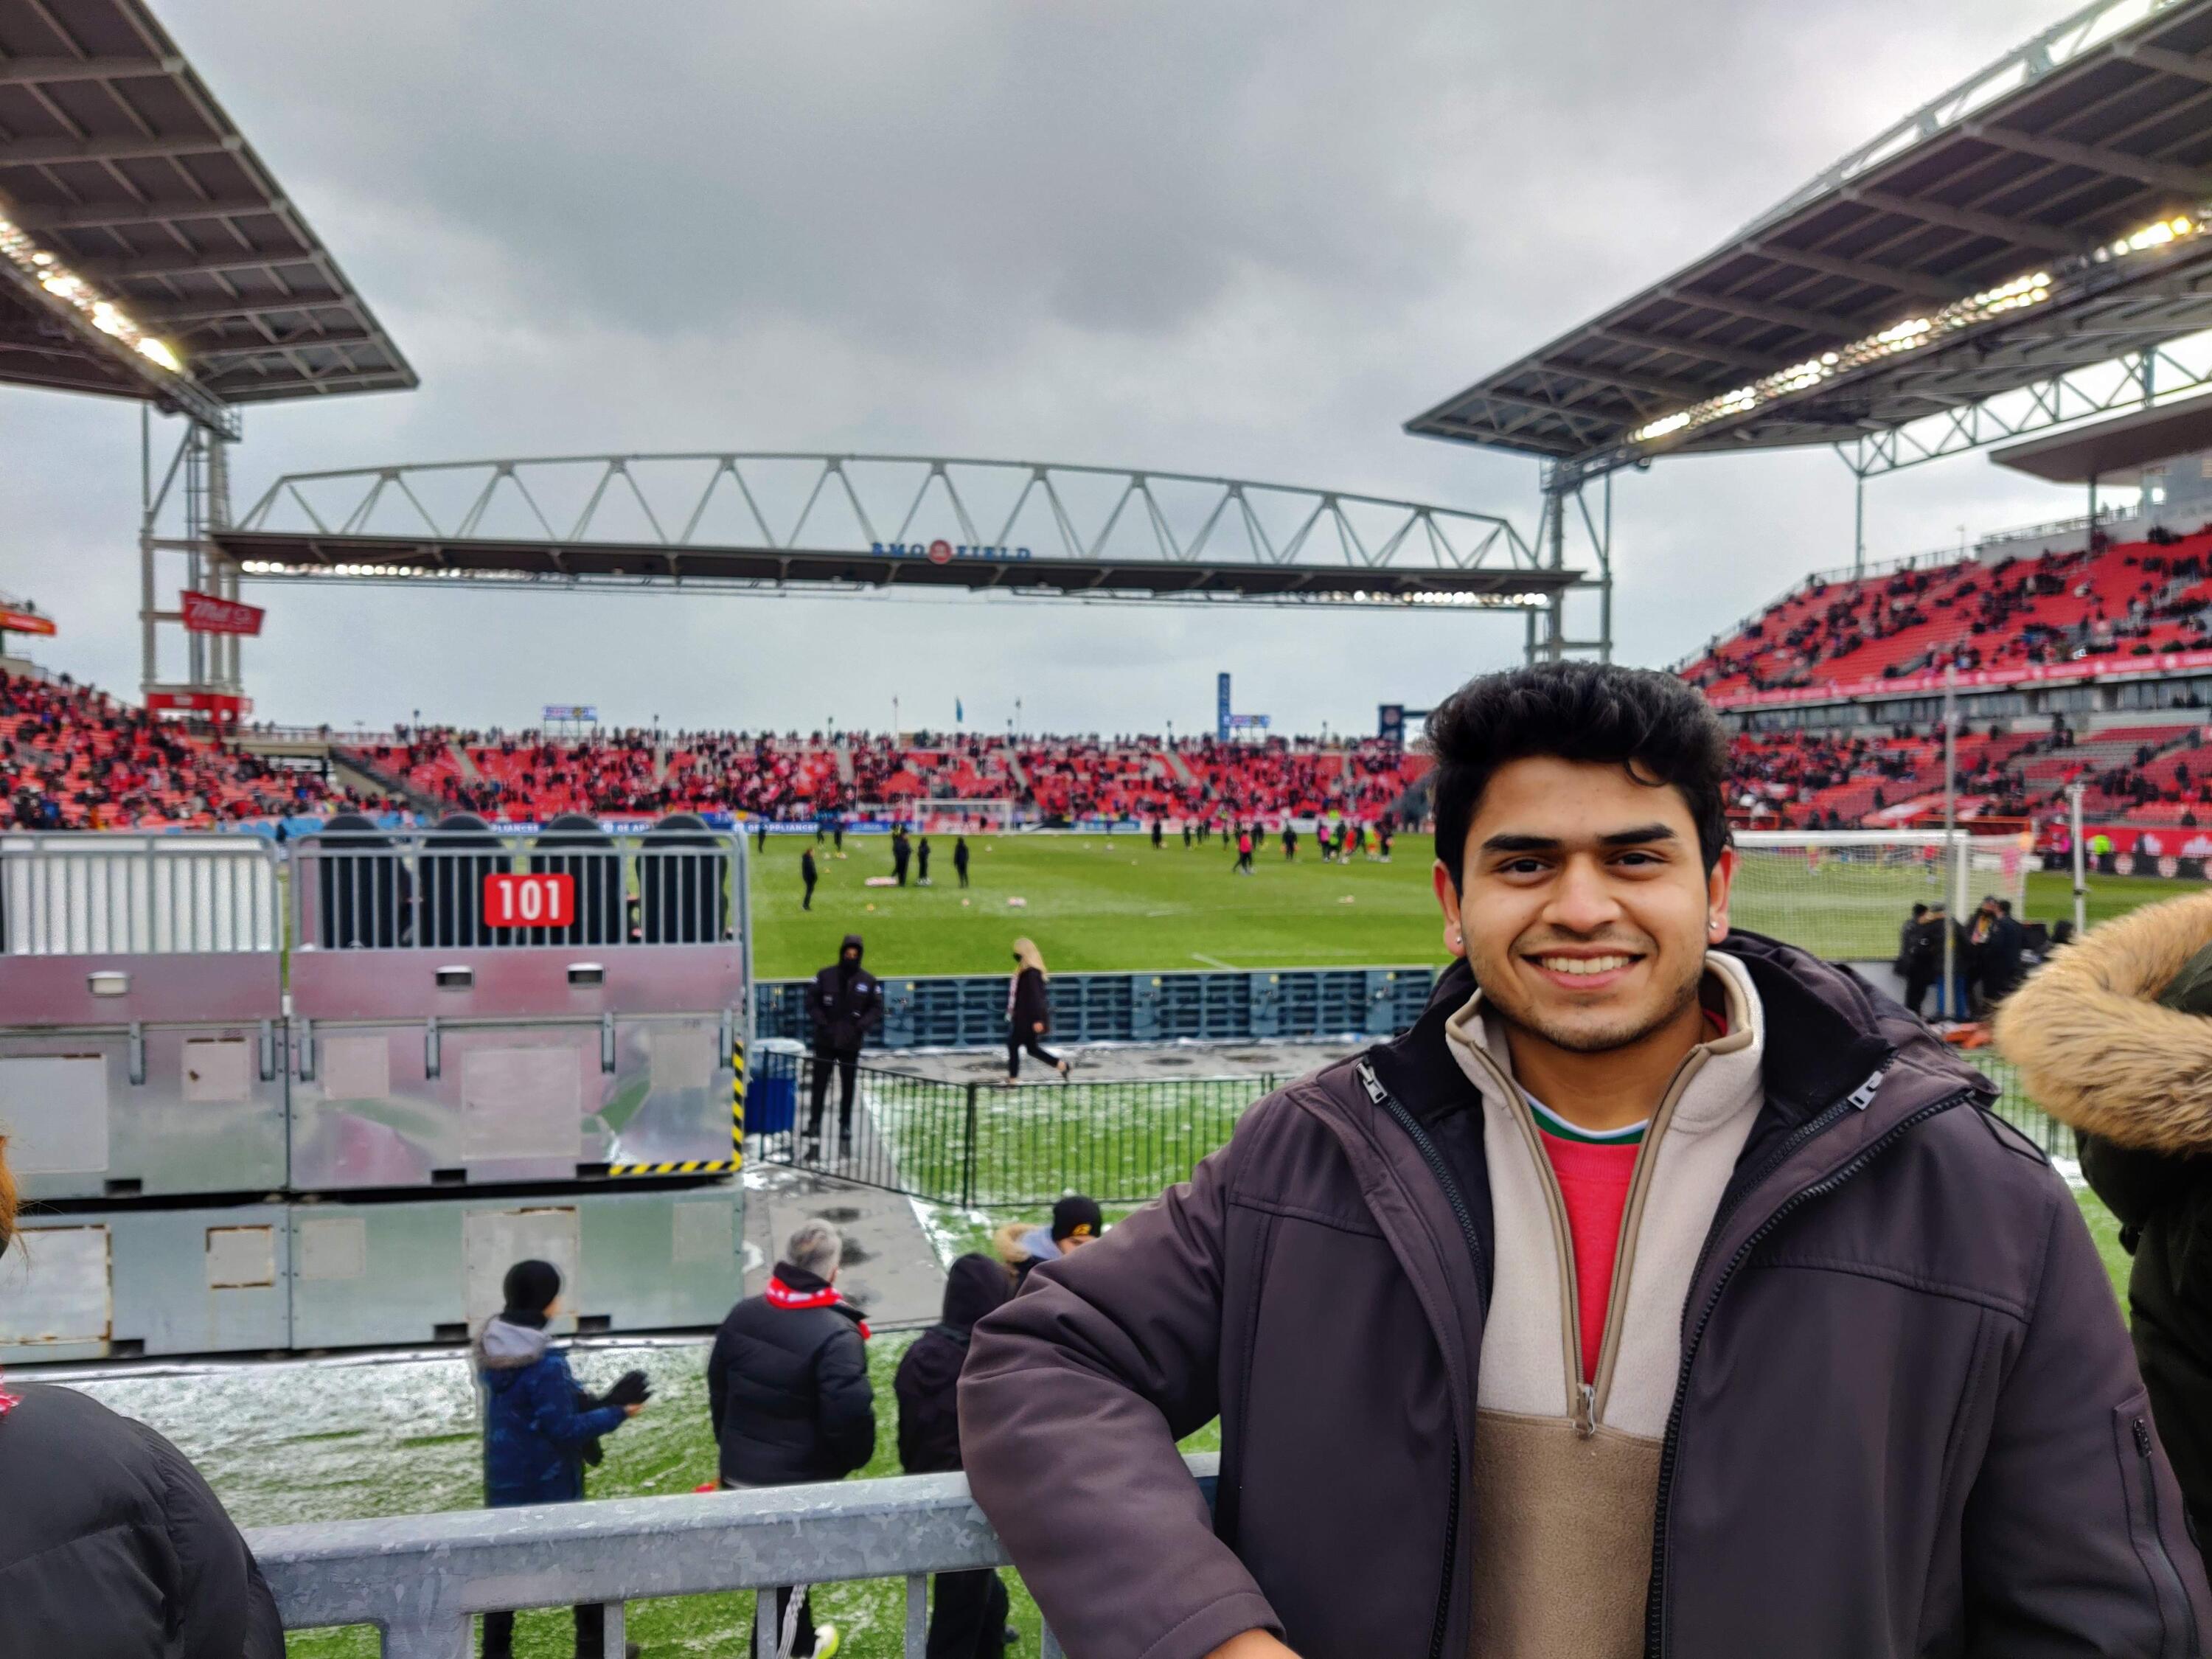 Anand at an outdoor stadium 